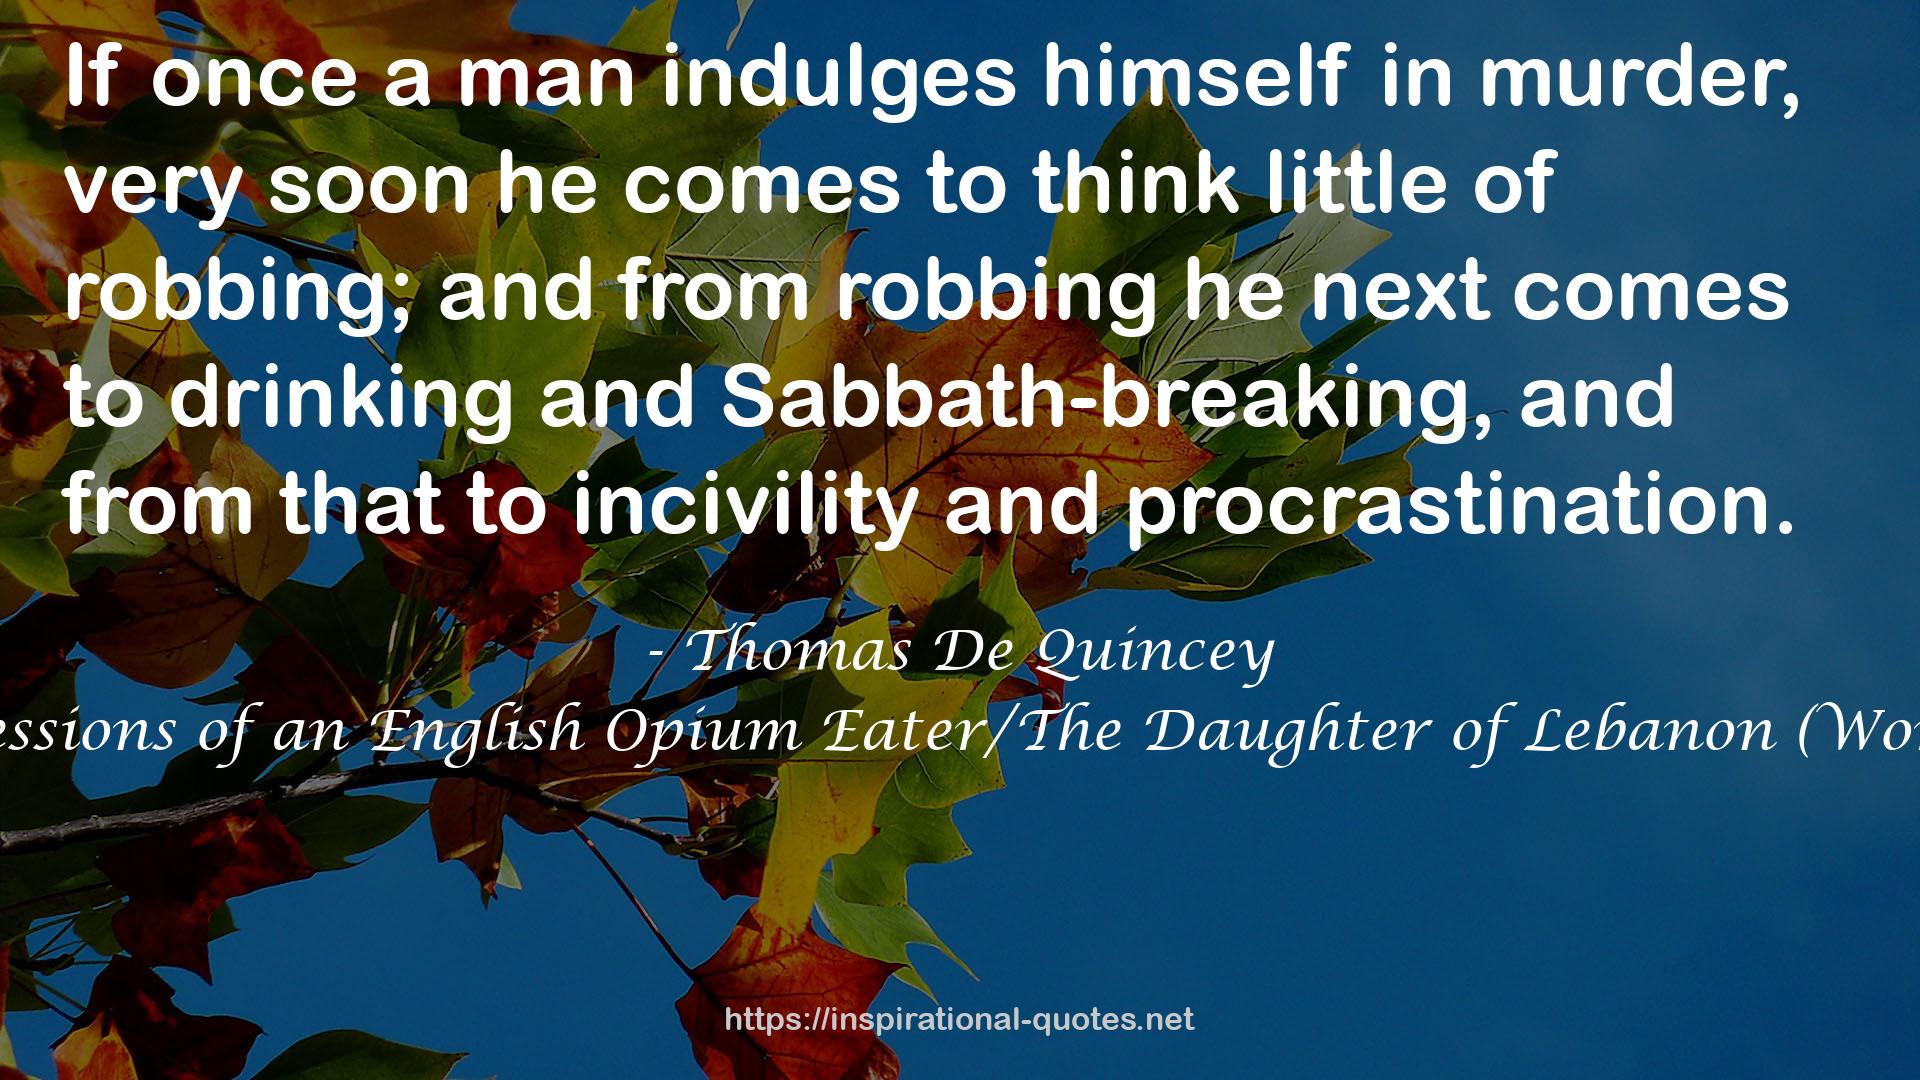 The Confessions of an English Opium Eater/The Daughter of Lebanon (Works, Vol 1) QUOTES